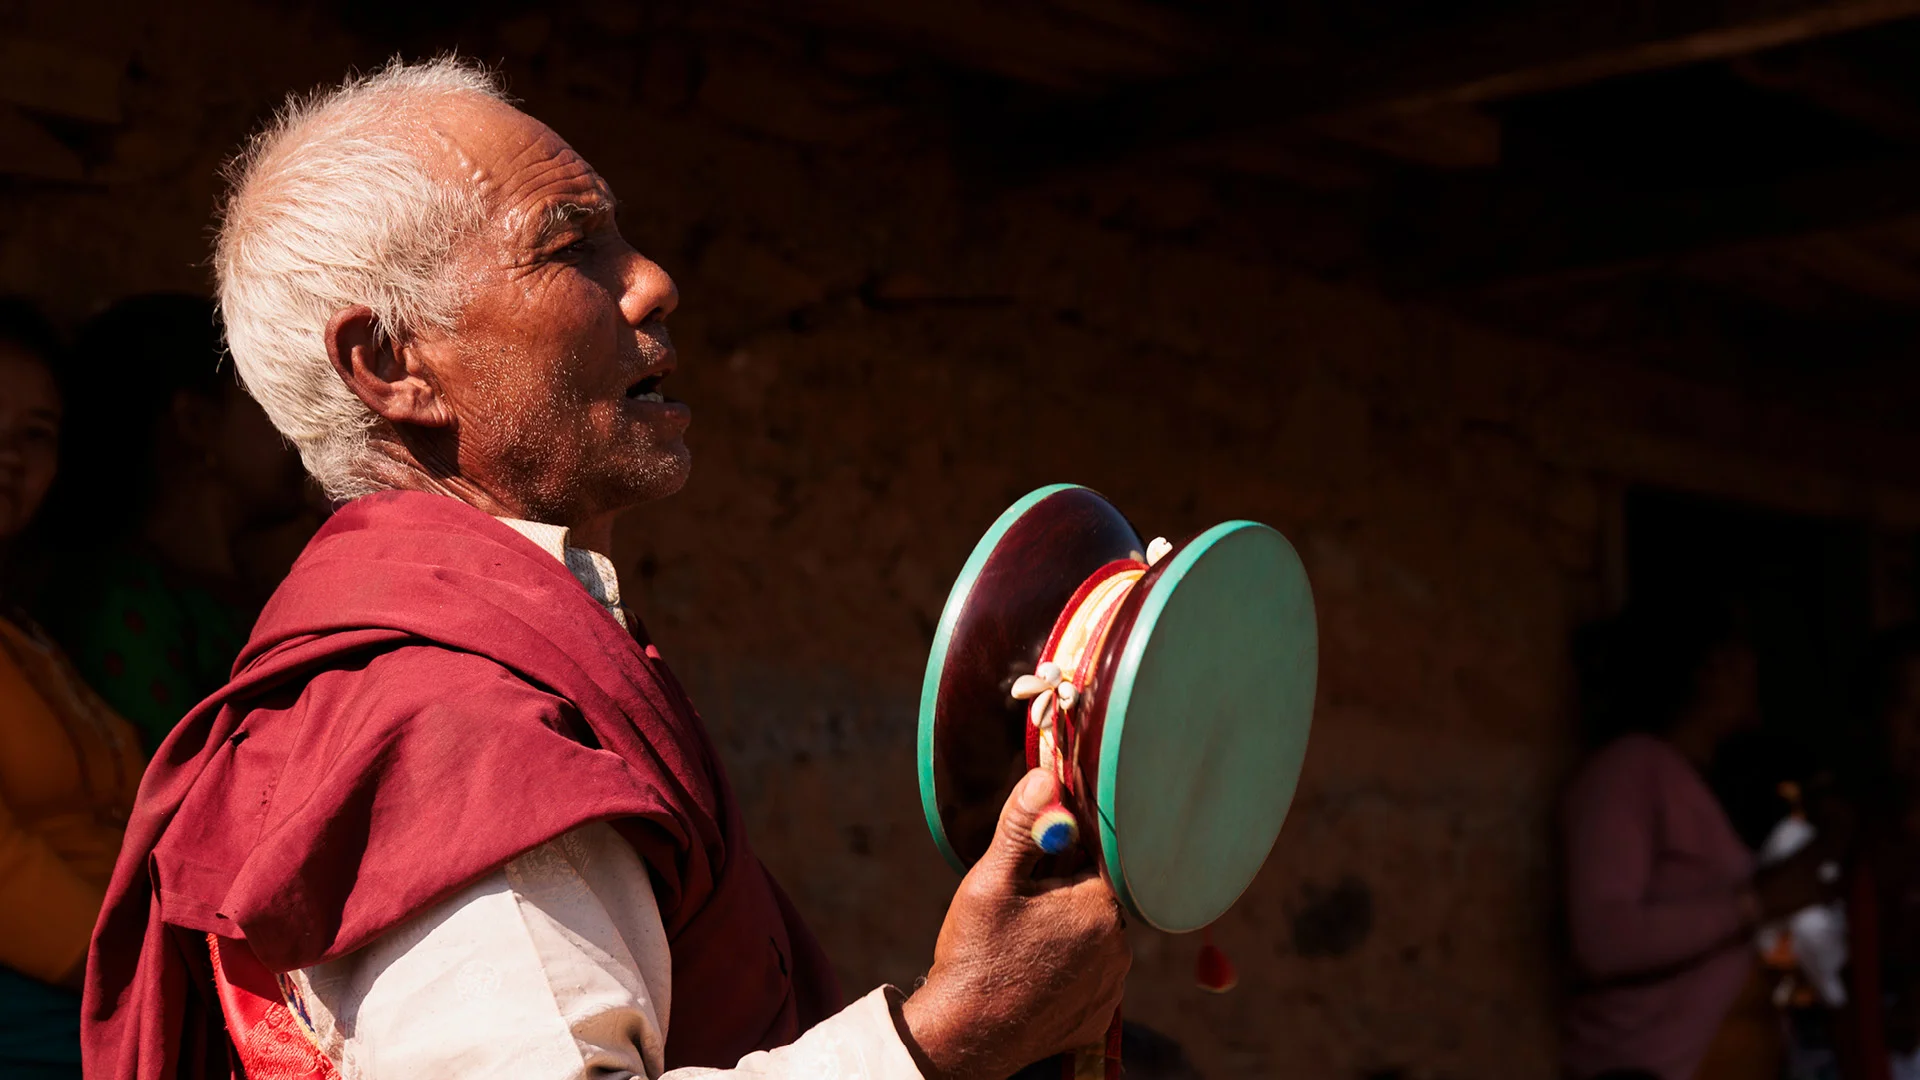 Great lama praying and playing drums during a sacred dance in nepal